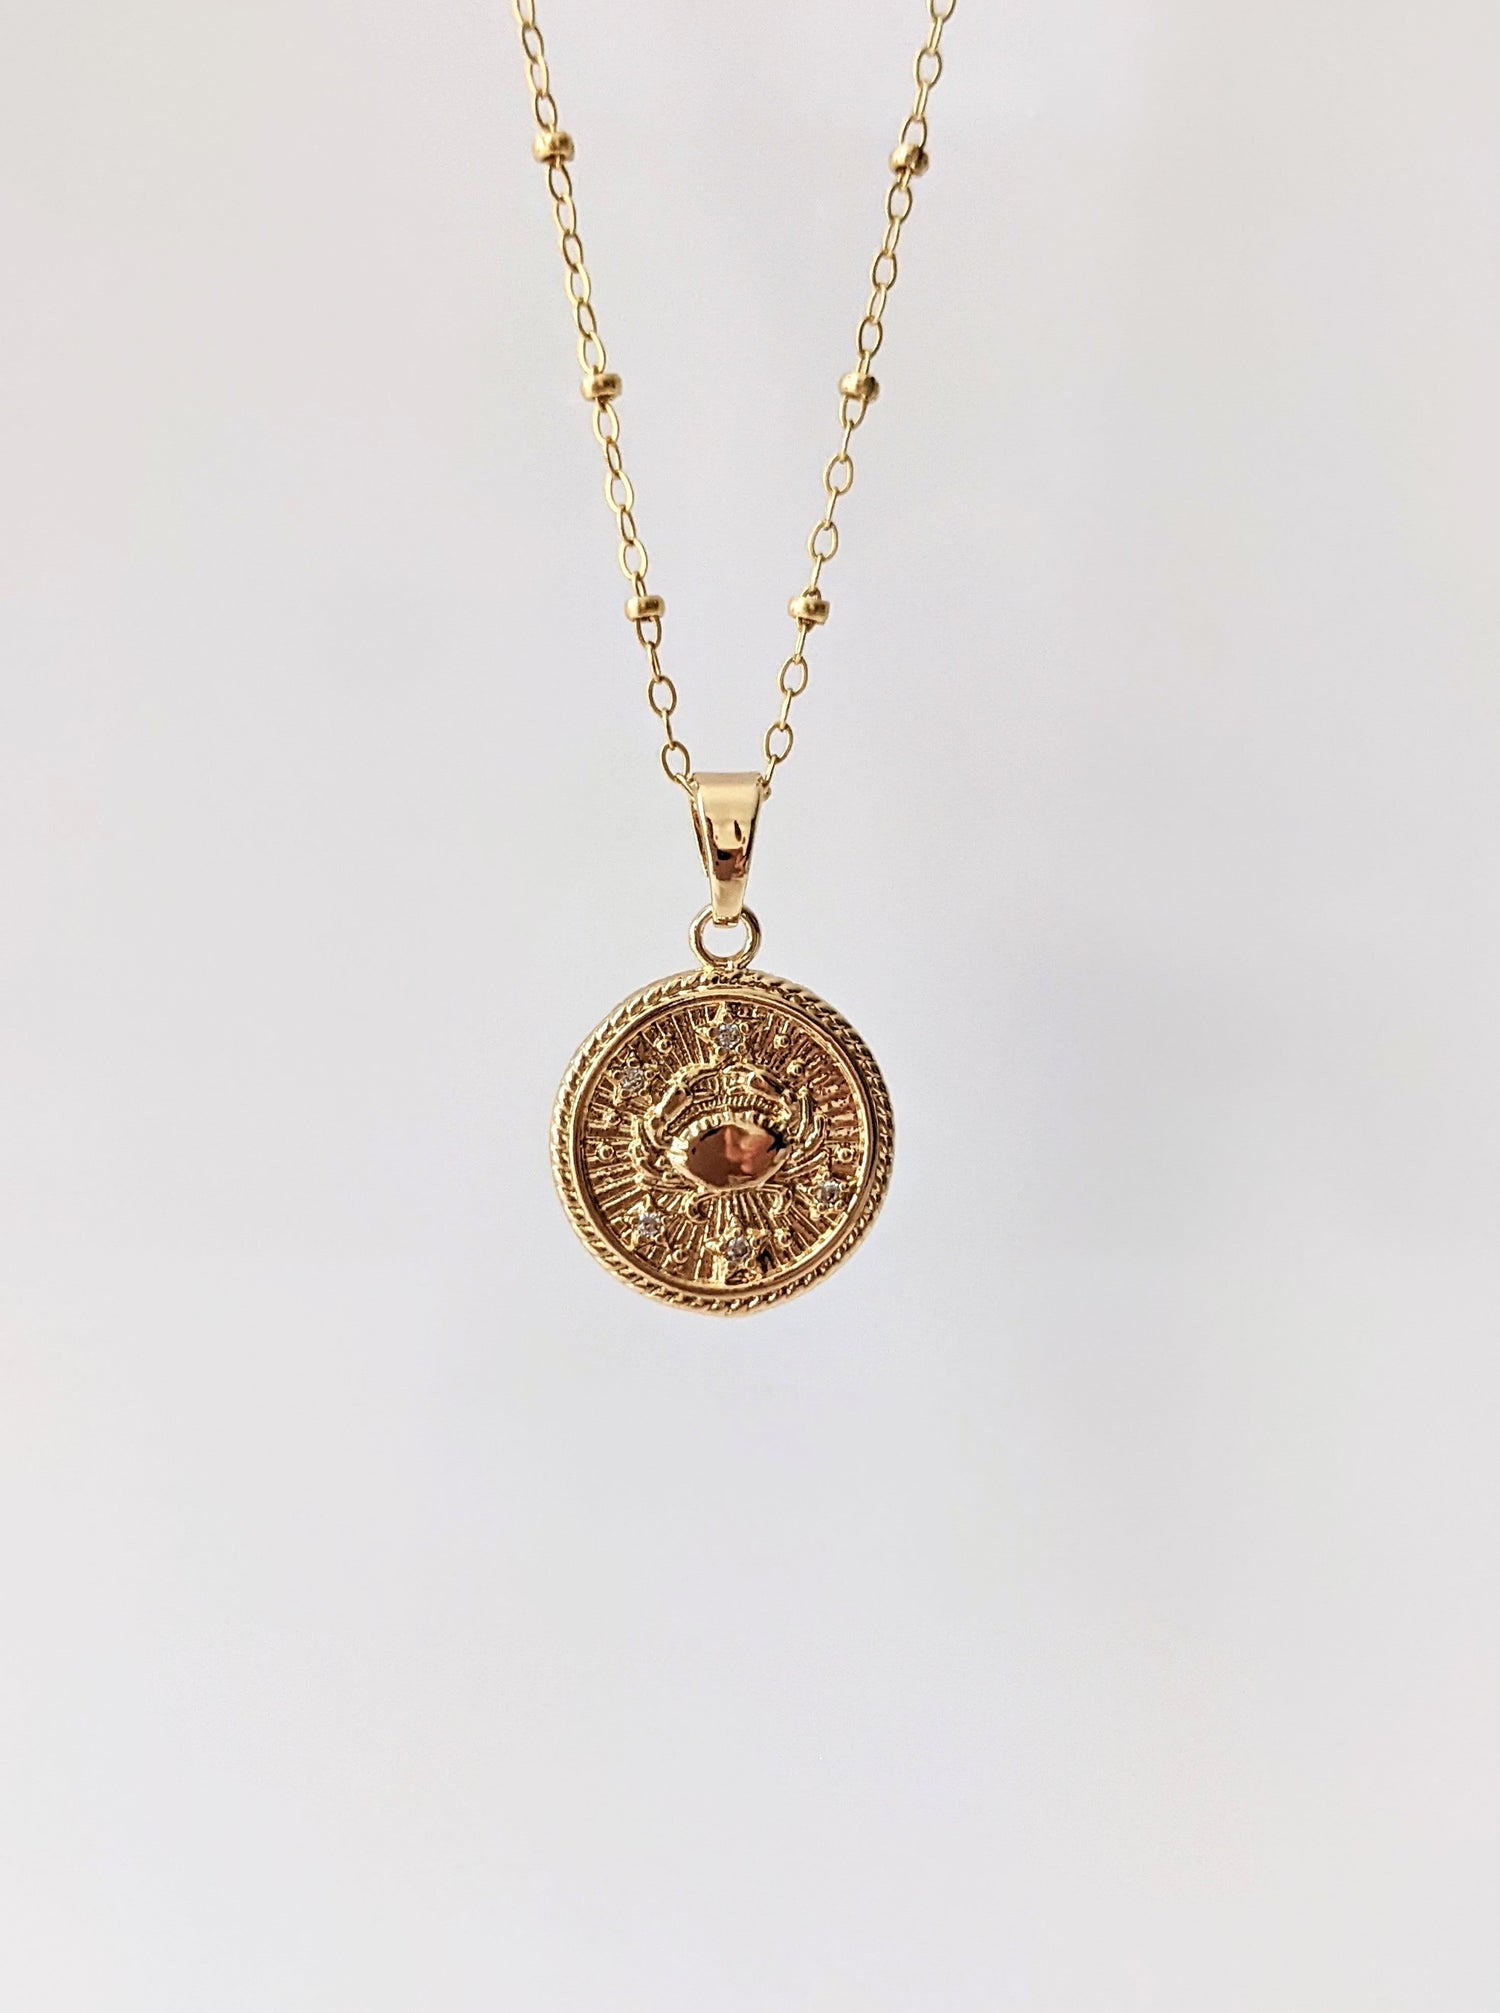 Cancer Zodiac Necklace Layer the Love